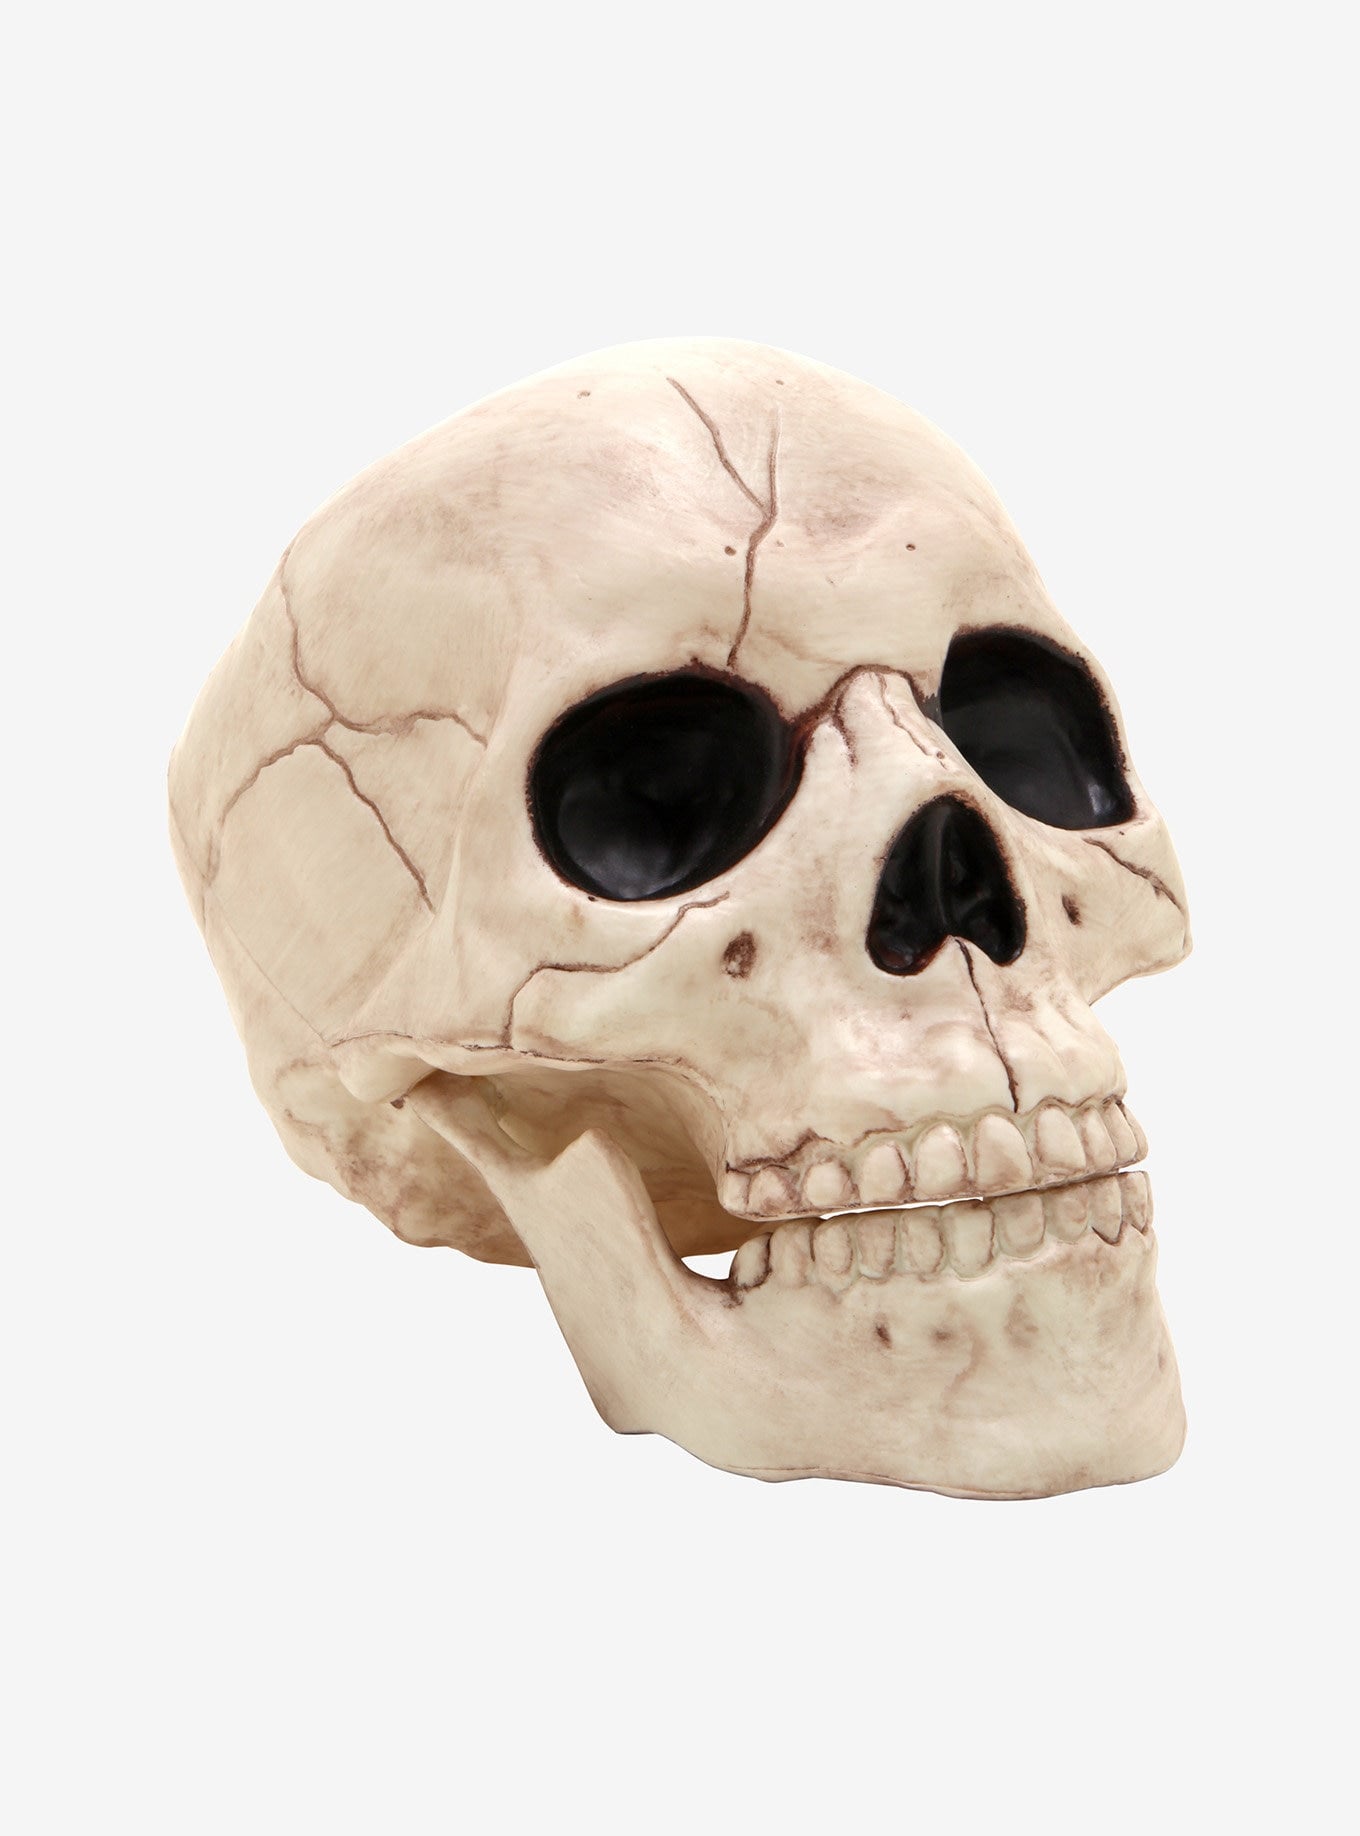 residu Bestaan Irrigatie Plastic Skull | Wow, Hot Topic's New Halloween-Themed Home Decor Is  Chillingly Cool | POPSUGAR Home Photo 12